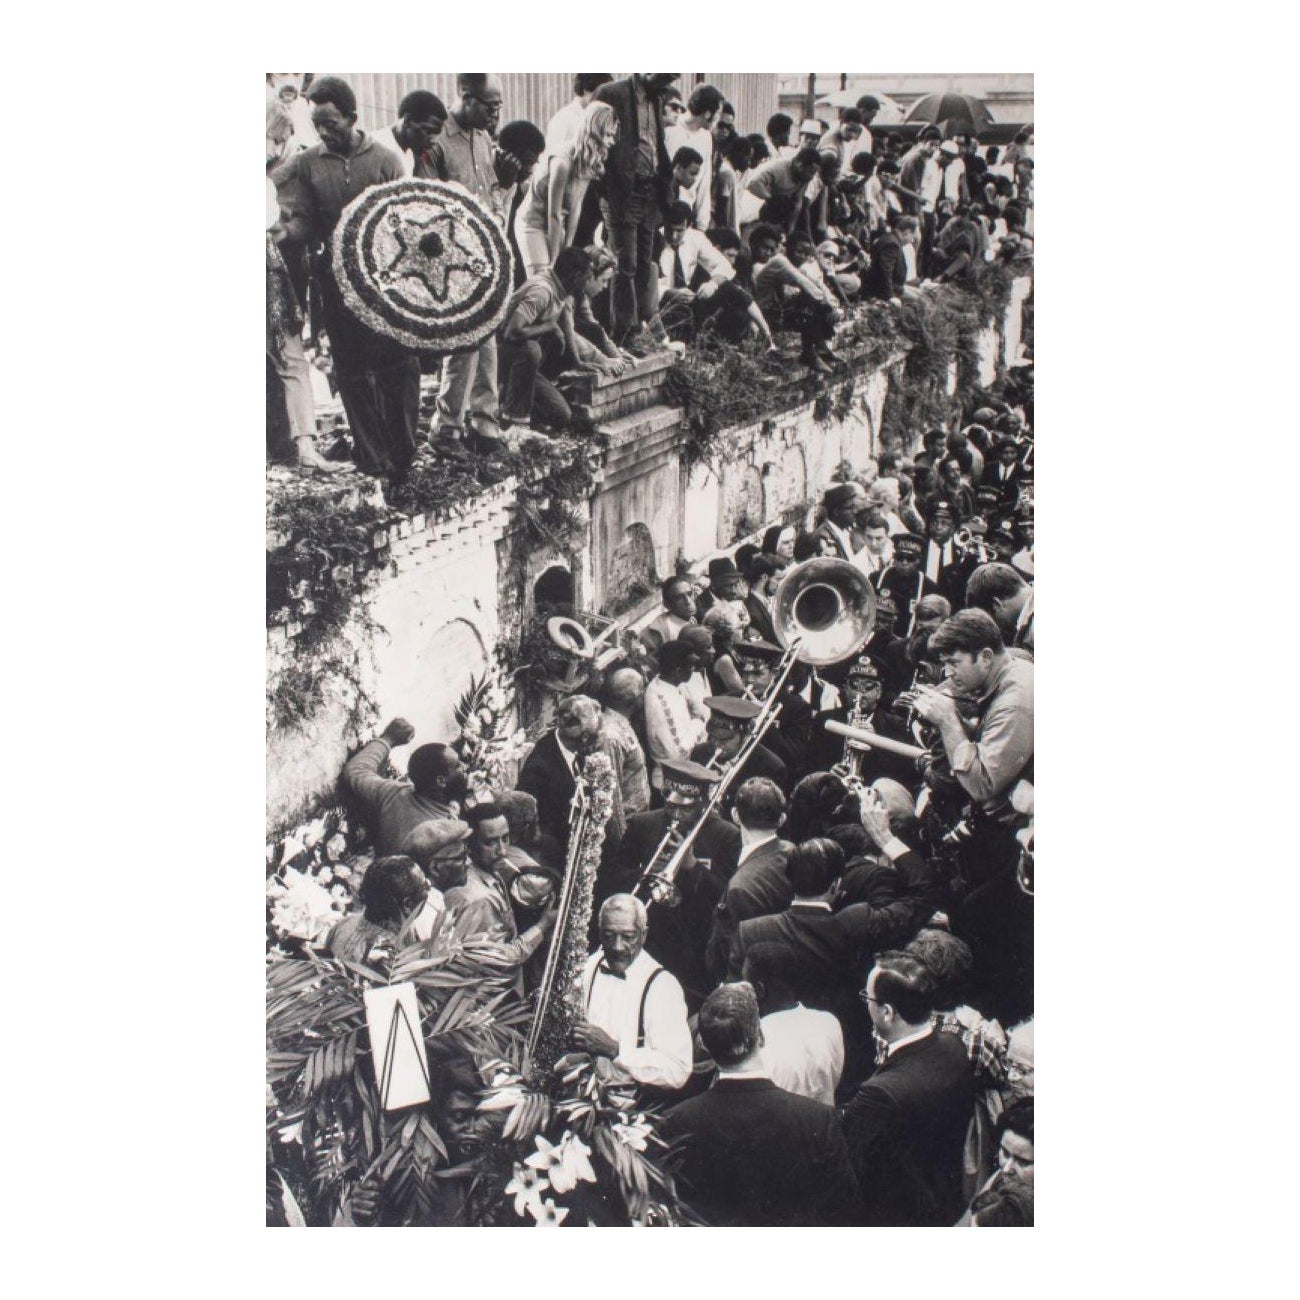 Leo Touchet "New Orleans Jazz Funeral" Photograph For Sale